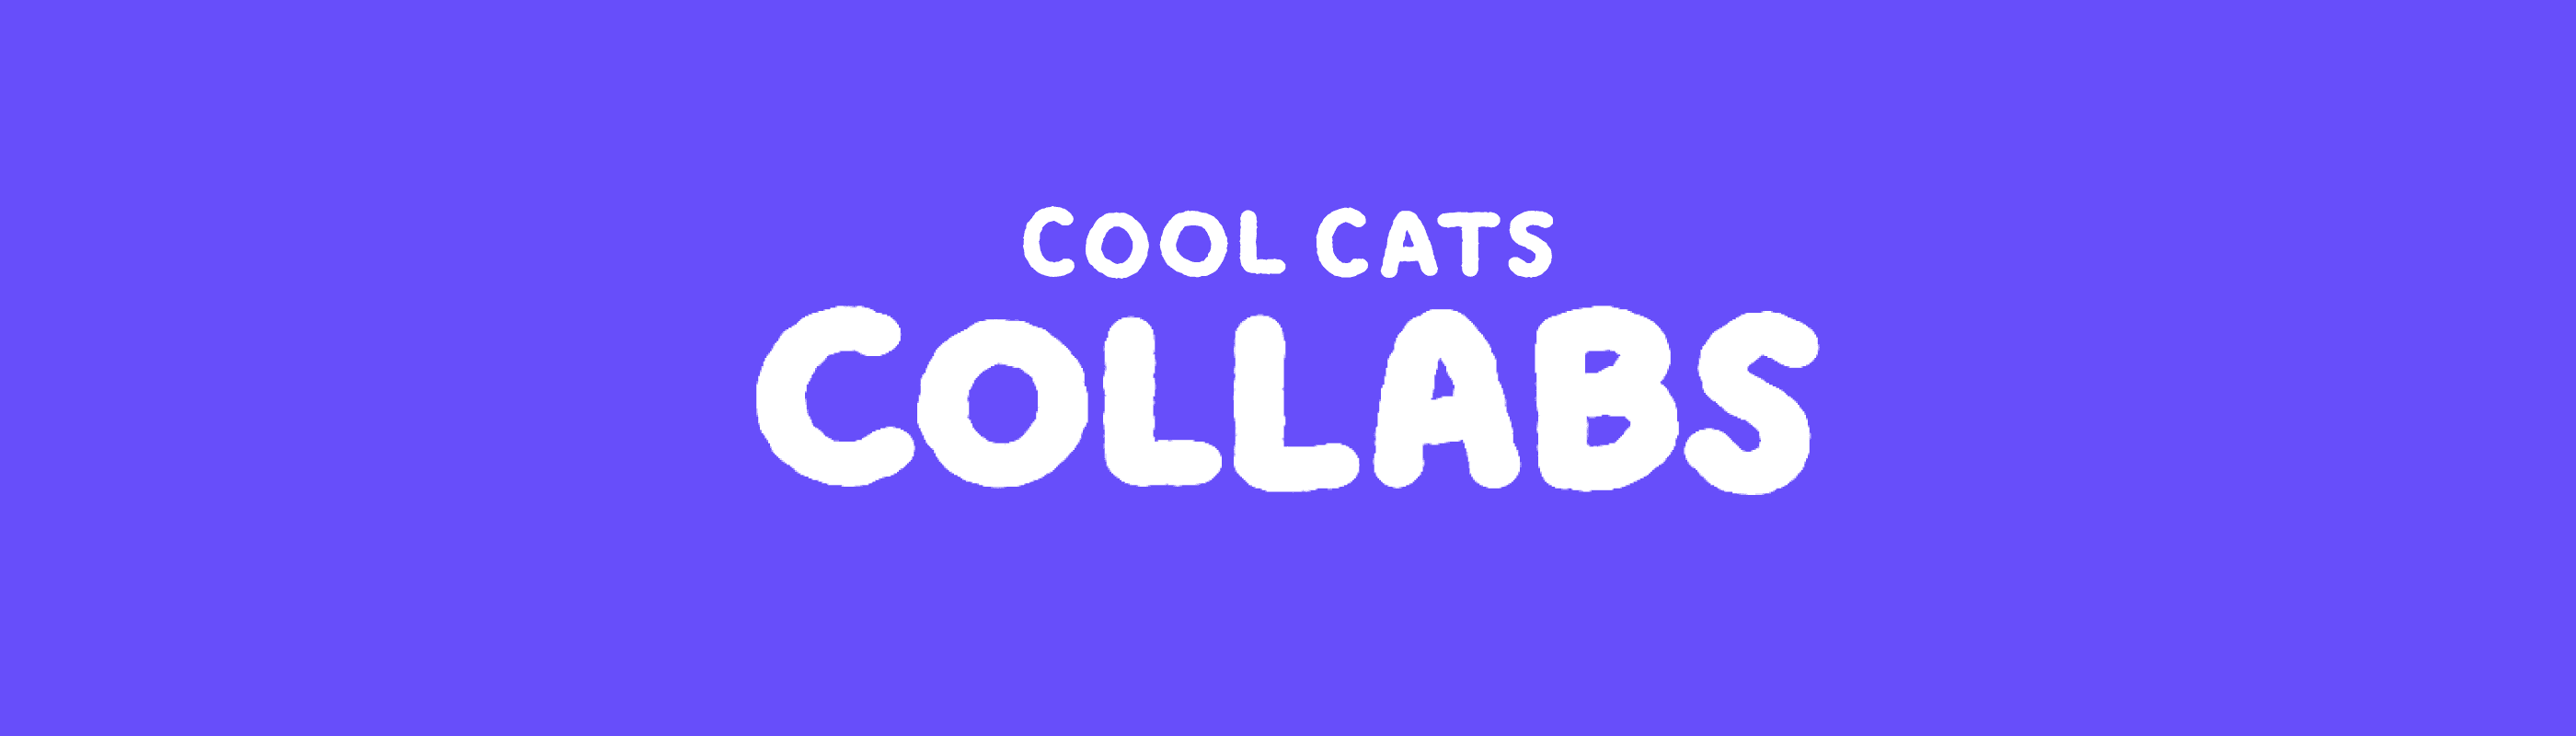 Cool Cats Collabs